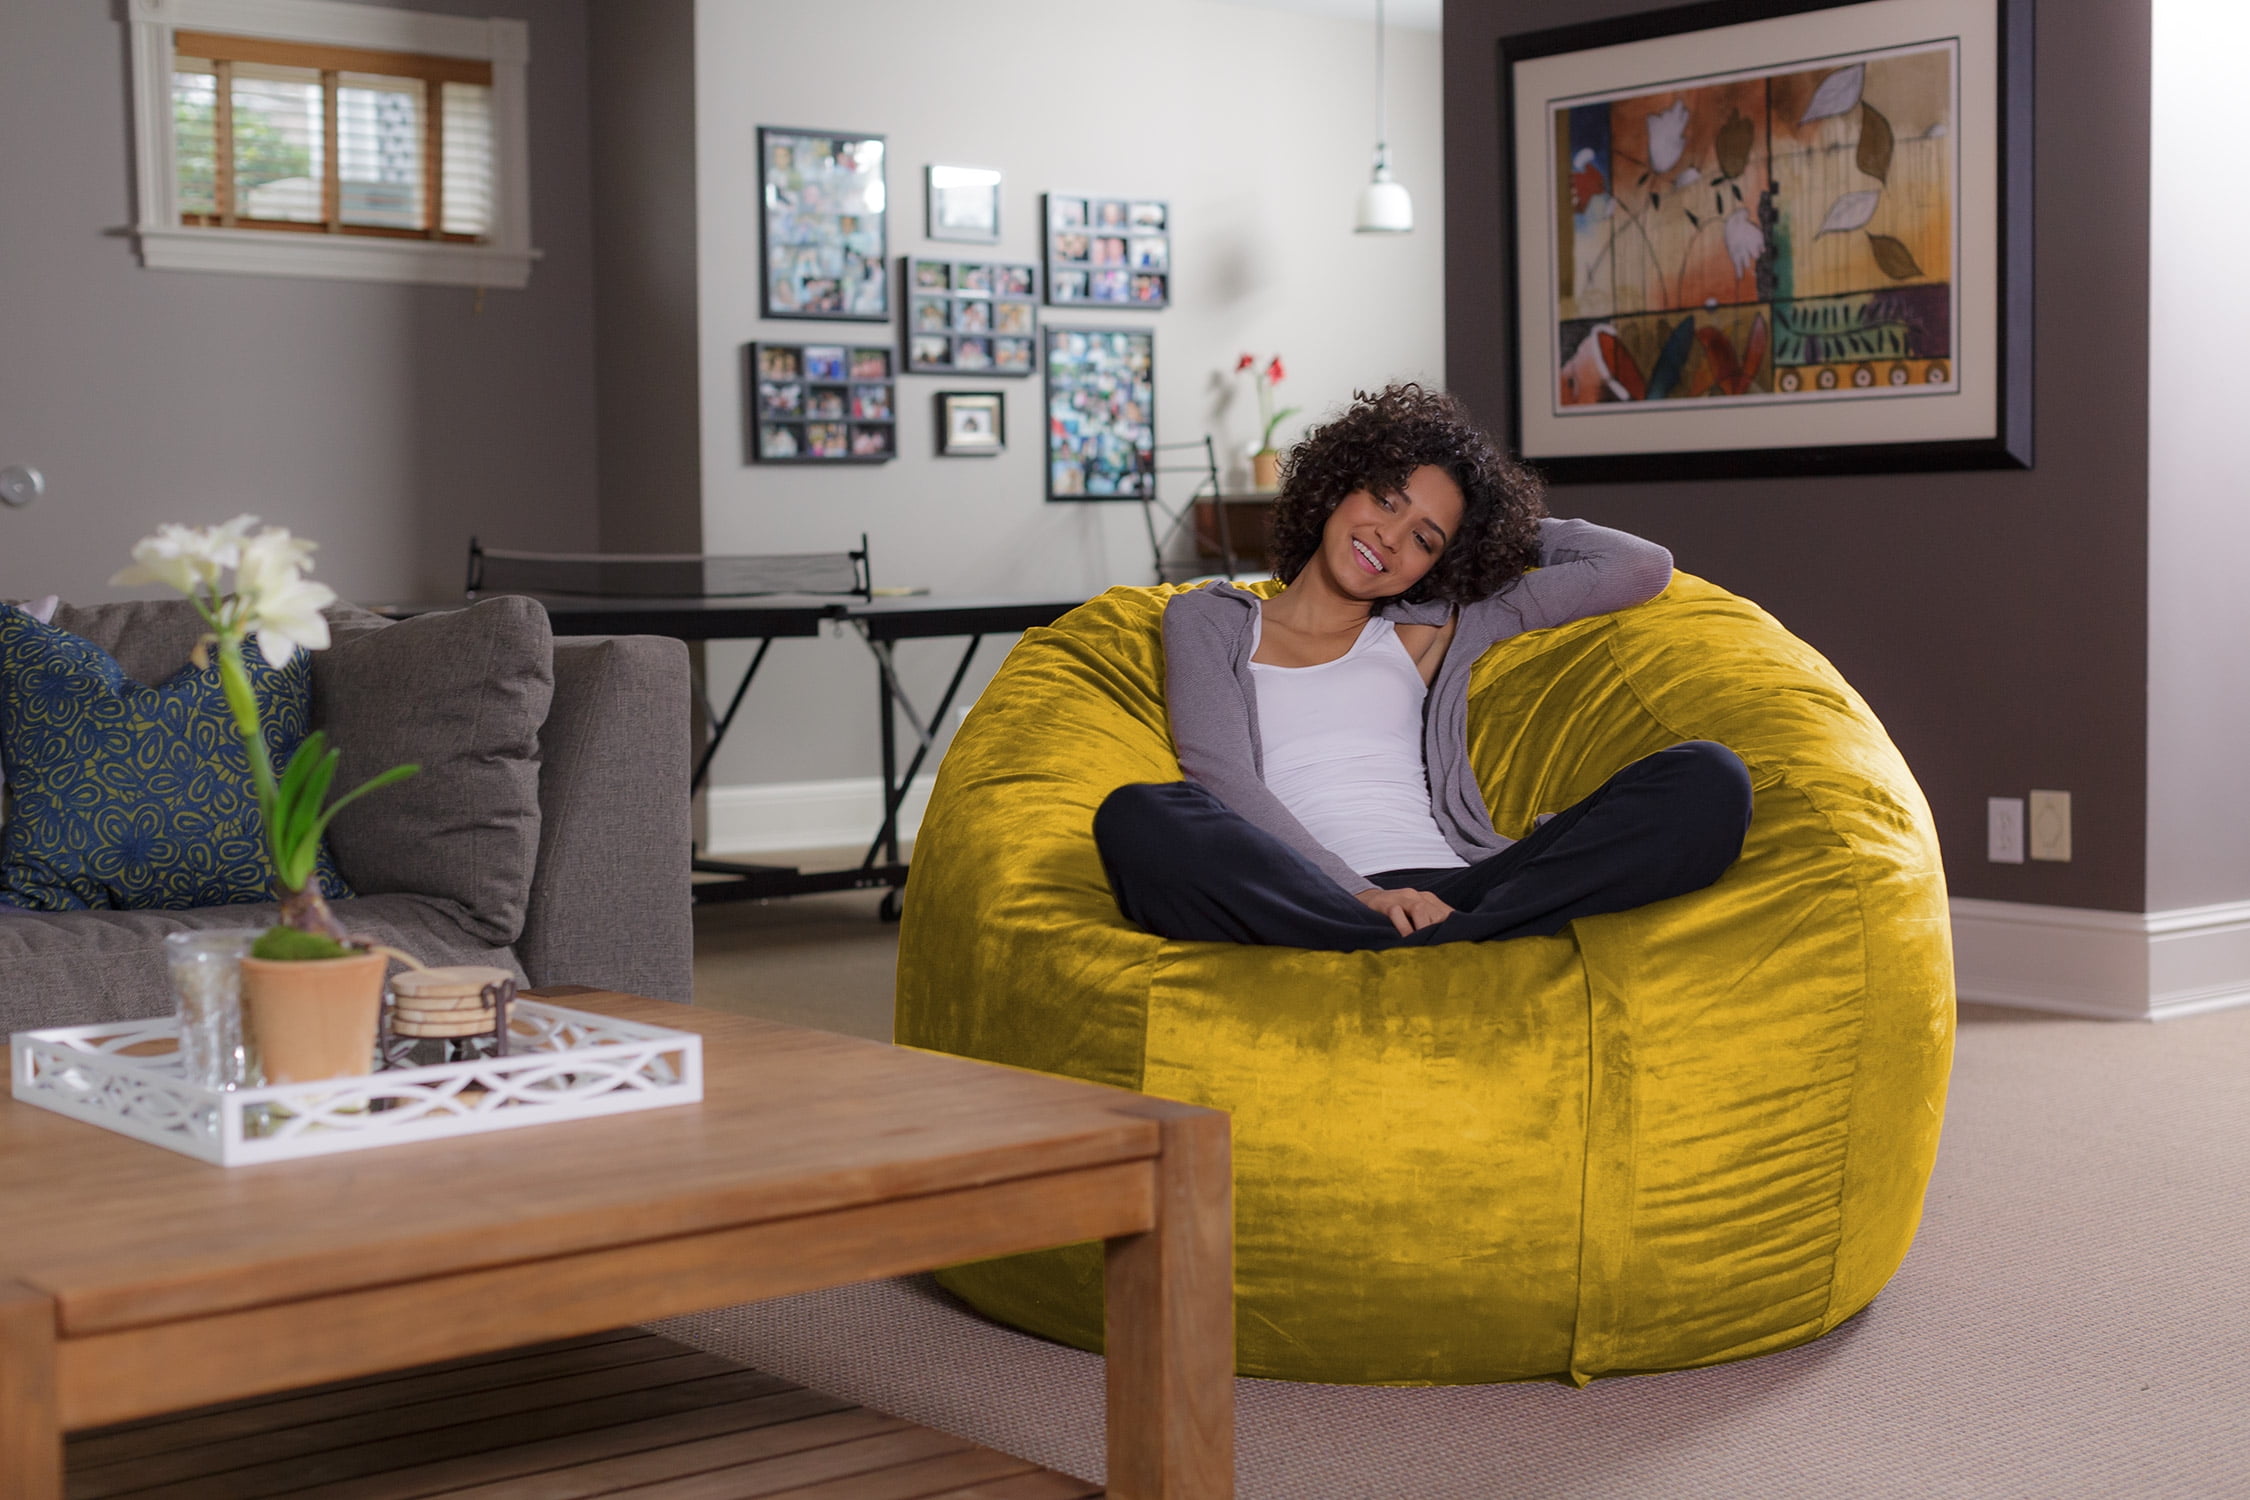  Giant Bean Bag for Adults, 7Ft 6Ft 5Ft Bean Bag Chair